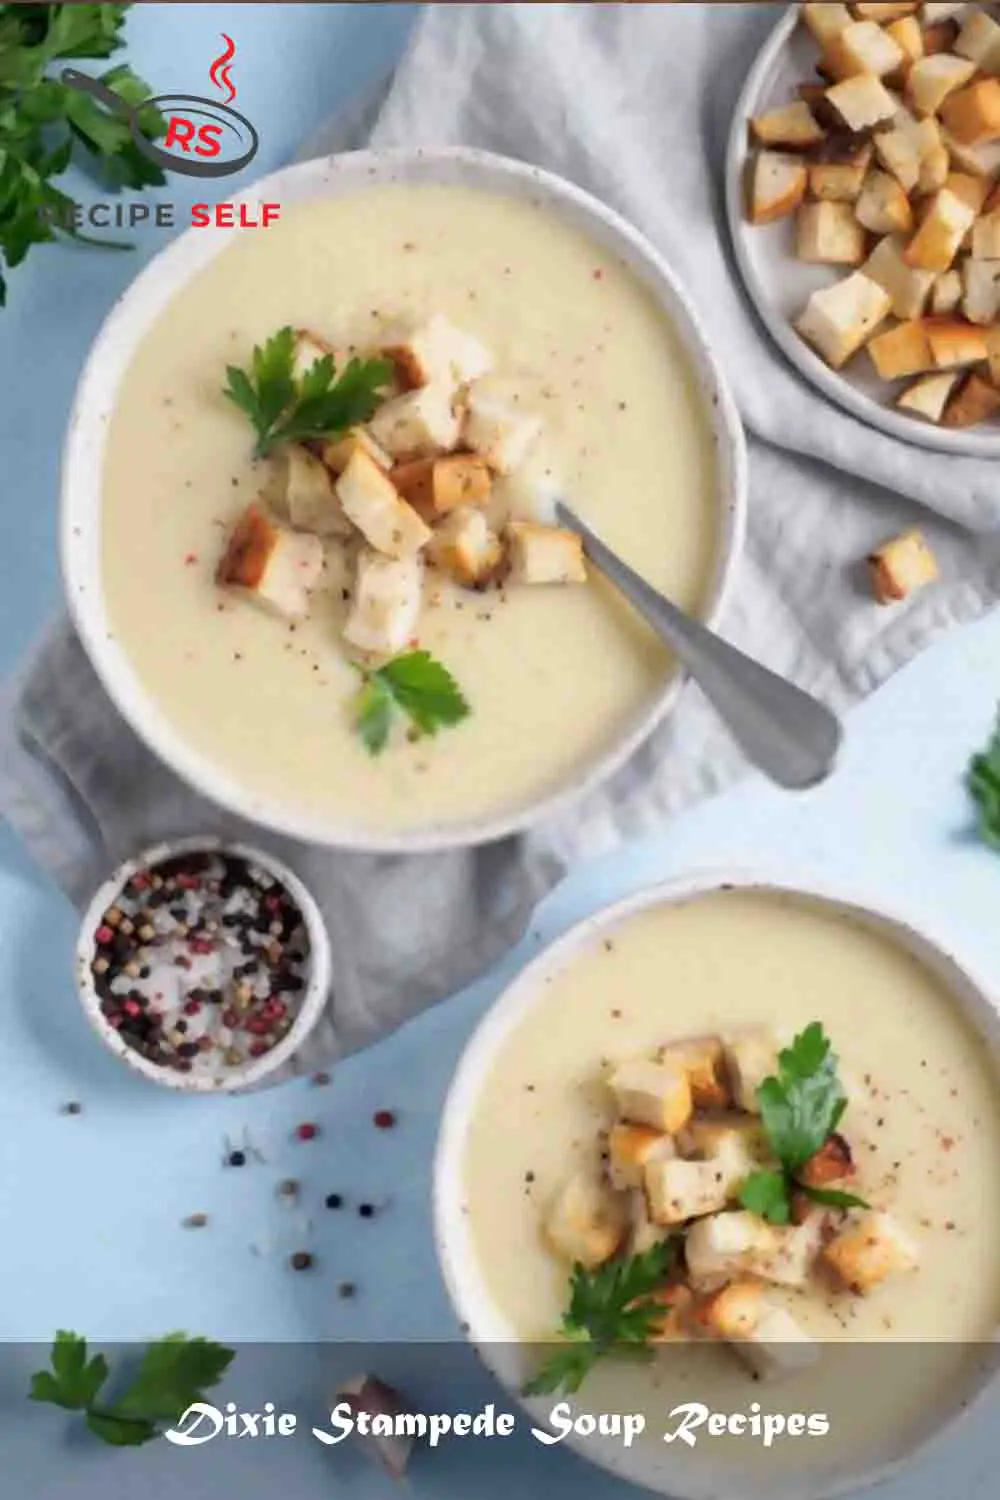 Dixie Stampede Soup Recipes